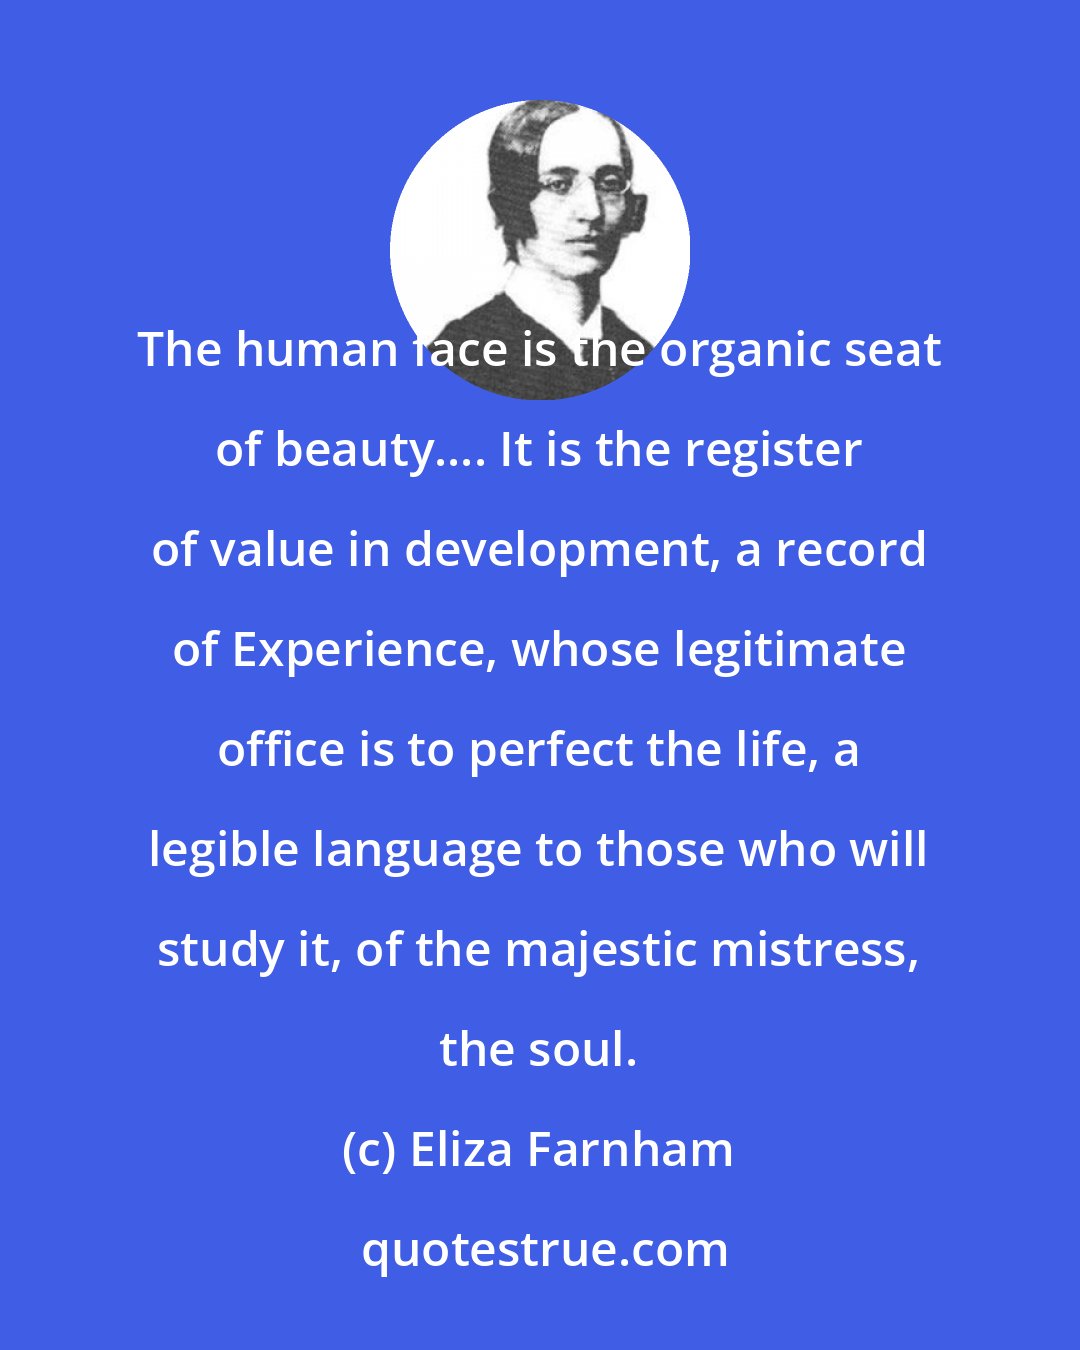 Eliza Farnham: The human face is the organic seat of beauty.... It is the register of value in development, a record of Experience, whose legitimate office is to perfect the life, a legible language to those who will study it, of the majestic mistress, the soul.